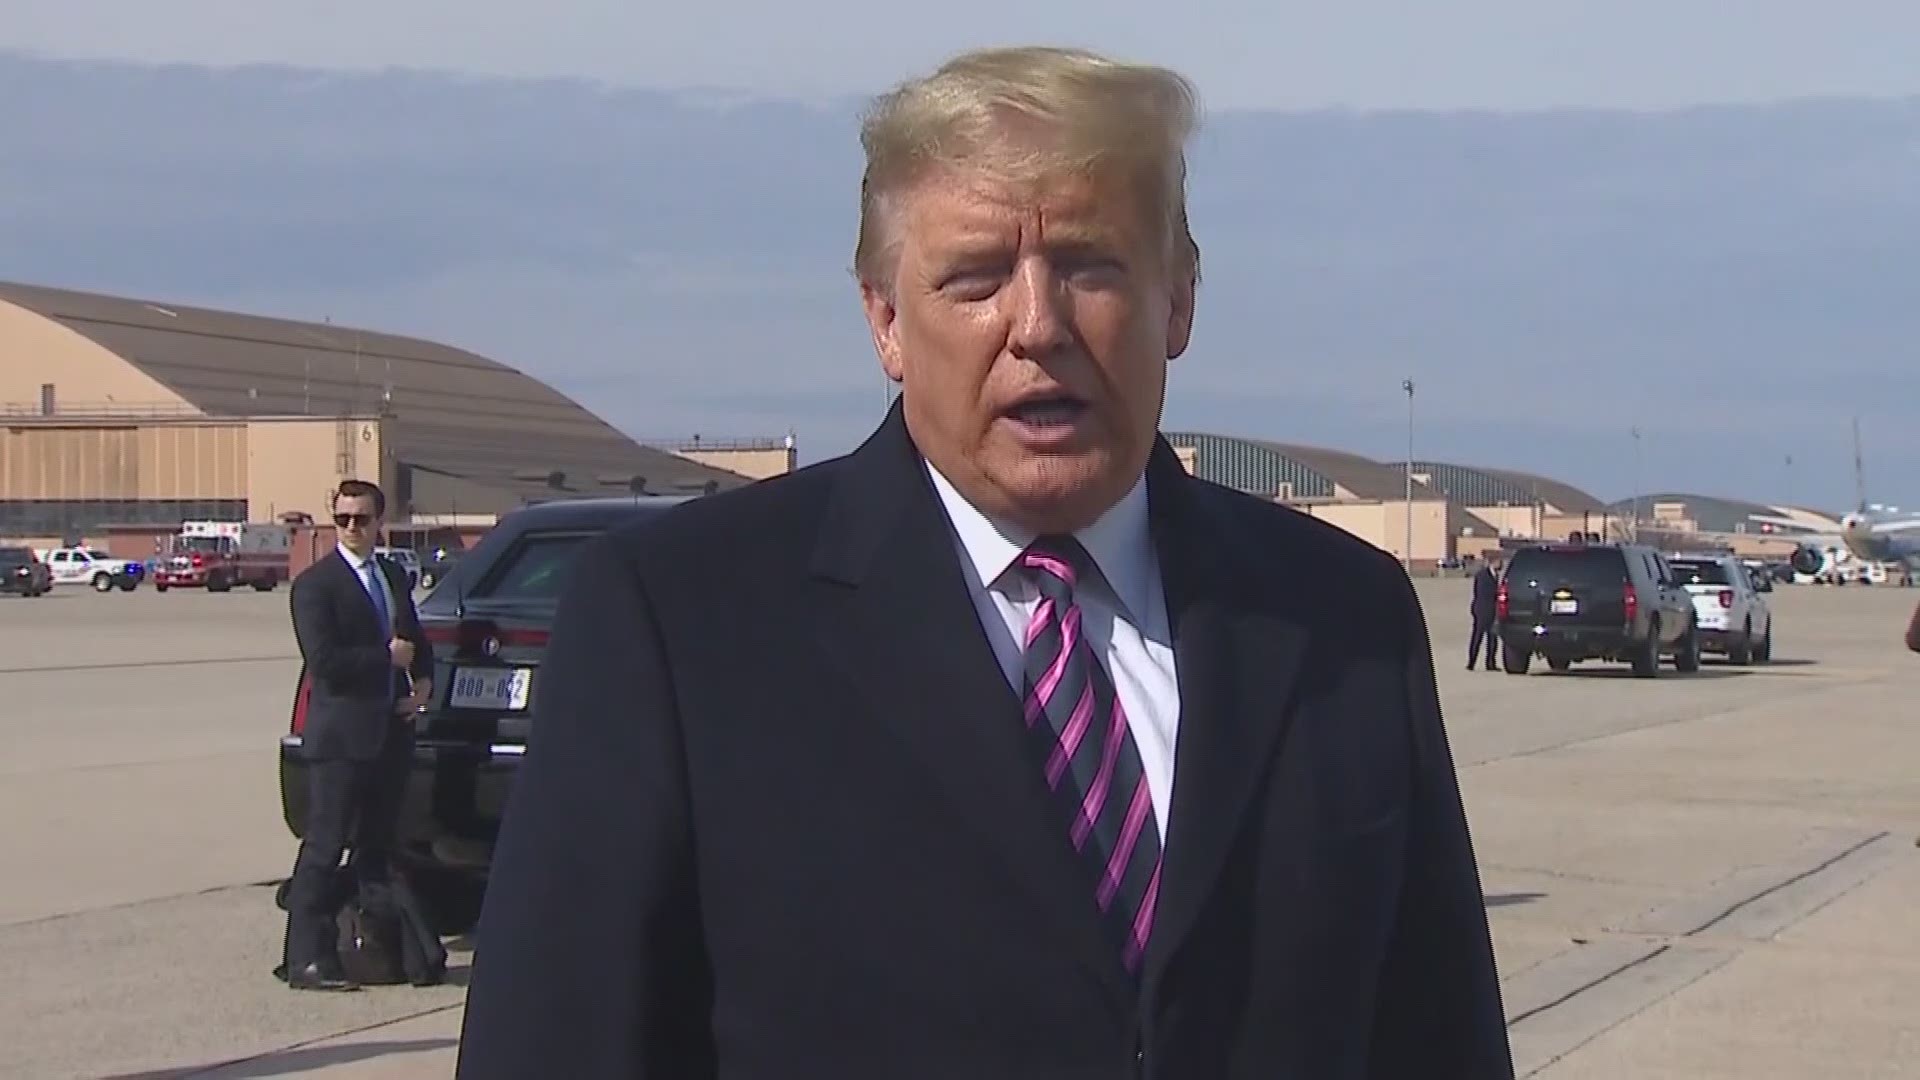 Before boarding Air Force One for a trip out West, President Donald Trump says he's commuted the 14-year prison sentence of ex-Illinois Gov. Rod Blagojevich. (POOL)